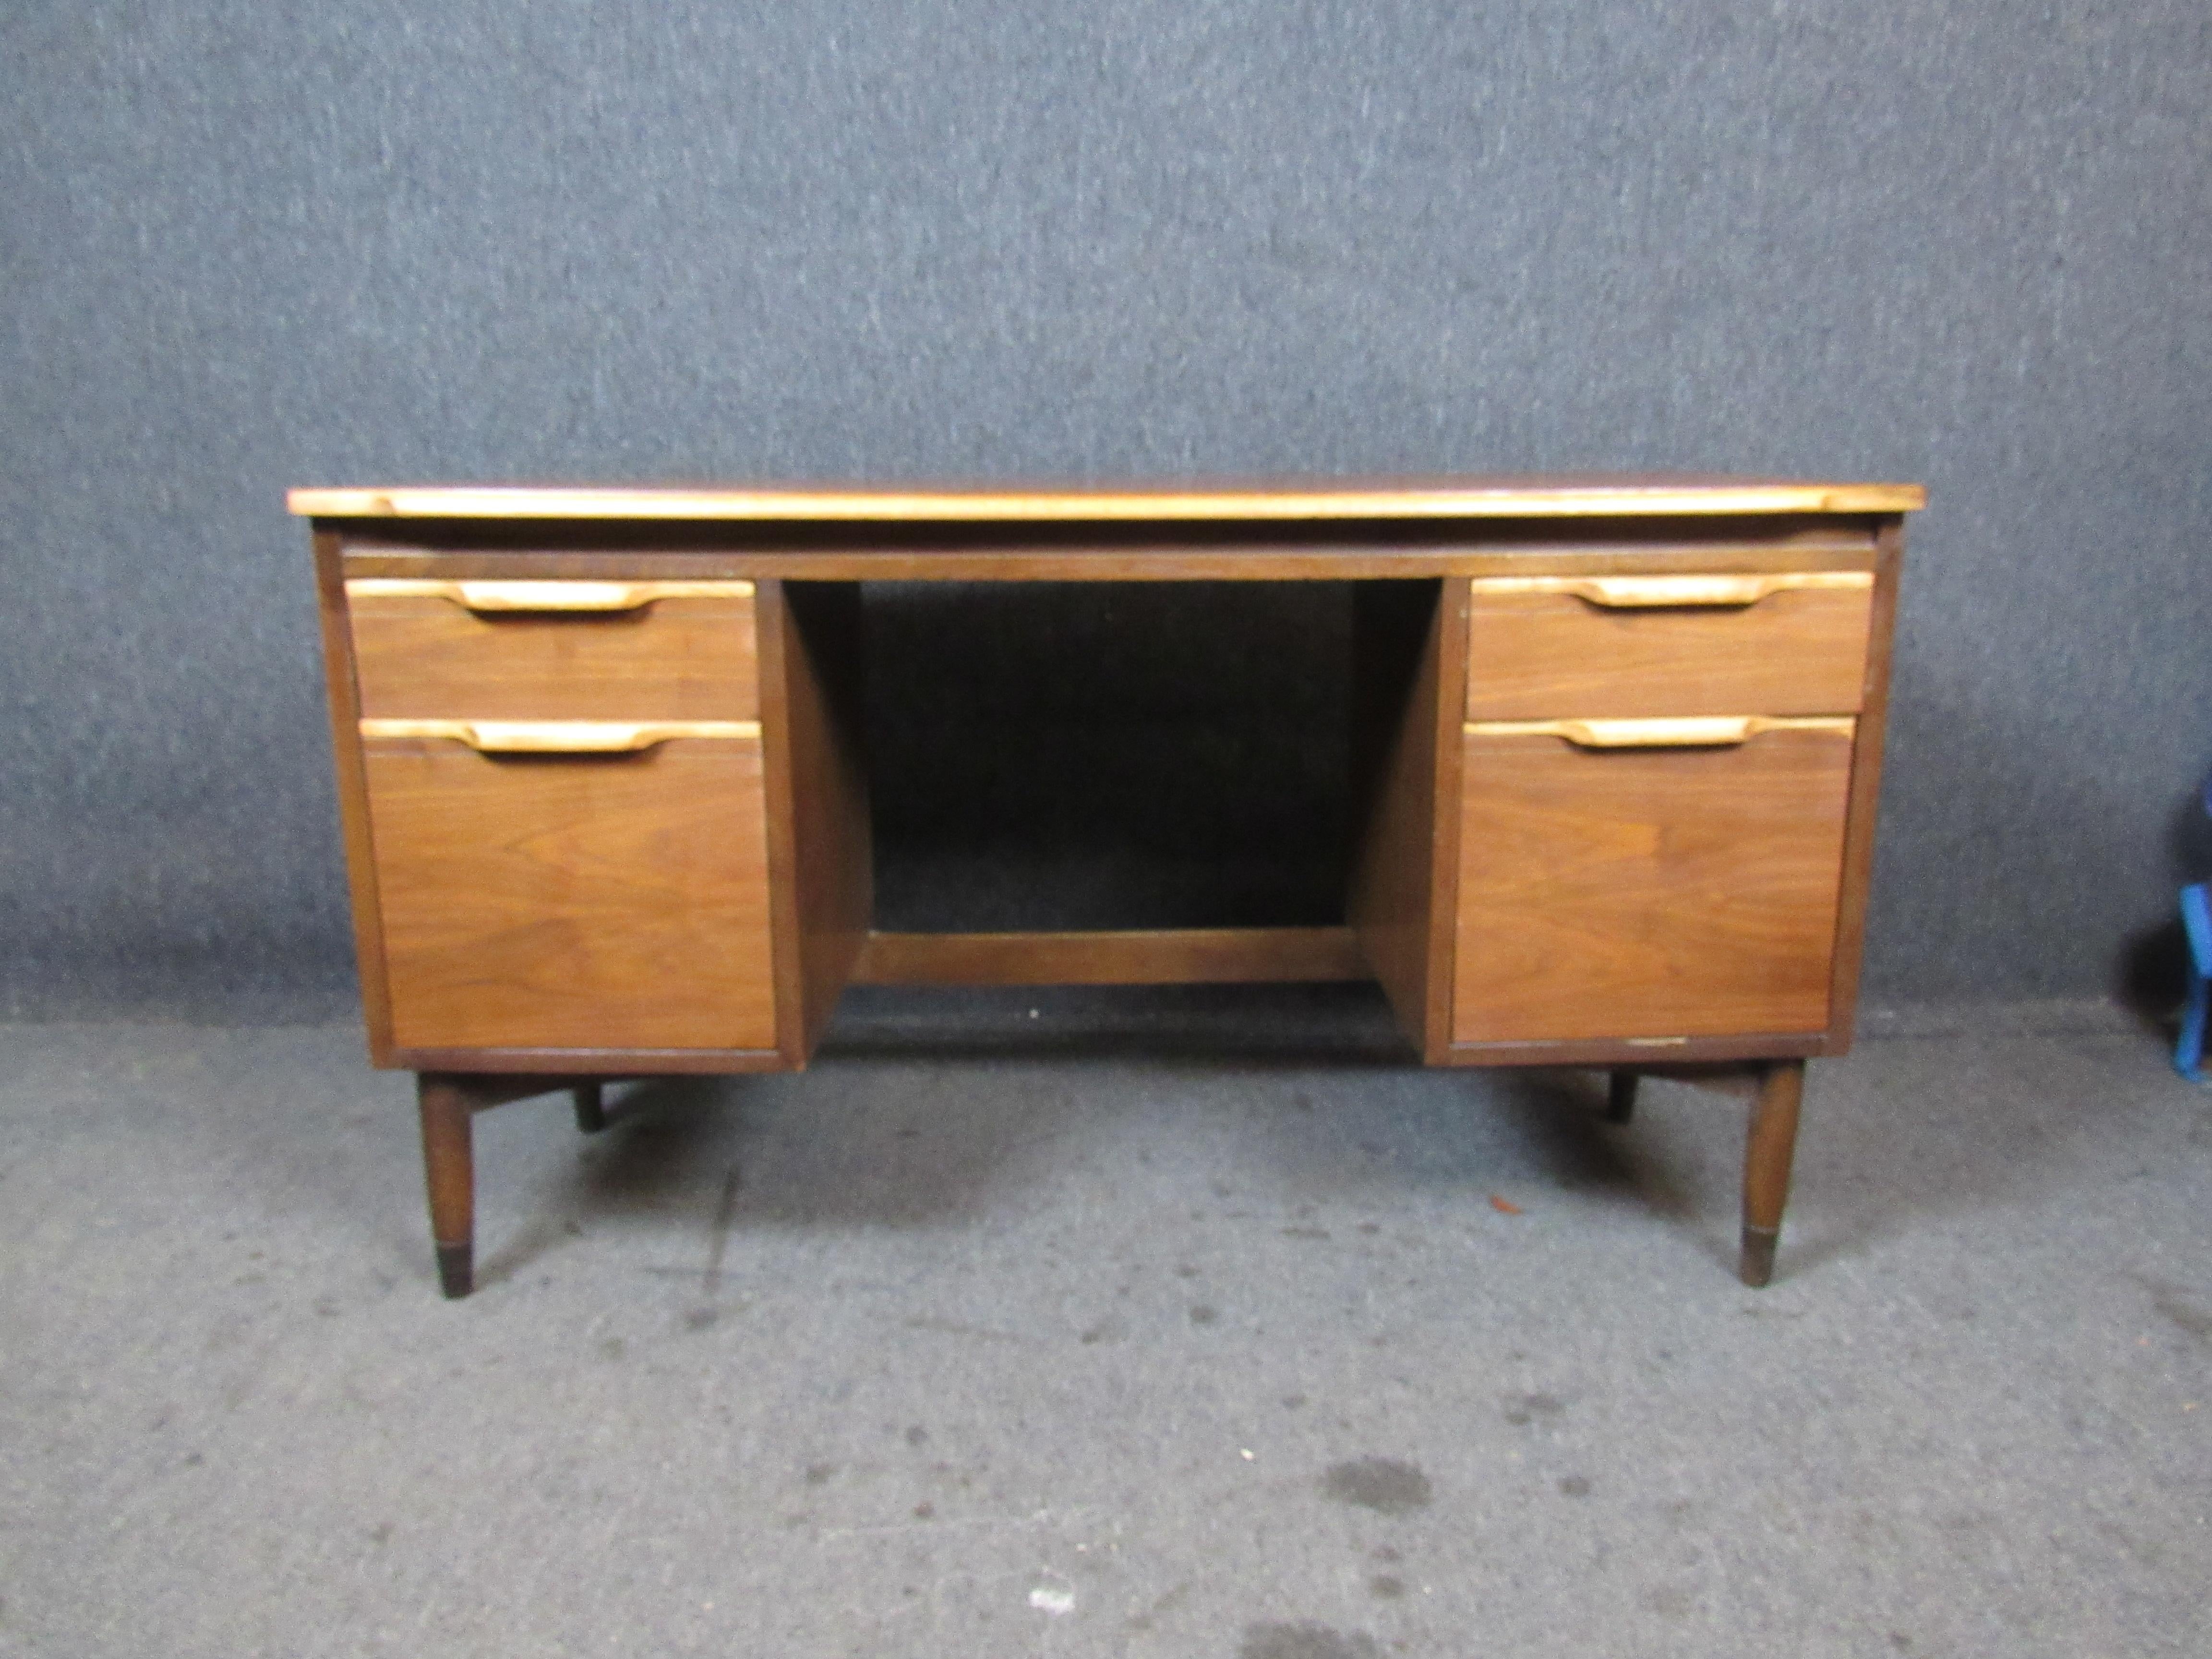 Newly refinished vintage American desk with unique features that are sure to impress! Featuring contrasting sculpted drop-pulls, a finished back, four ample drawers, and an unusual 